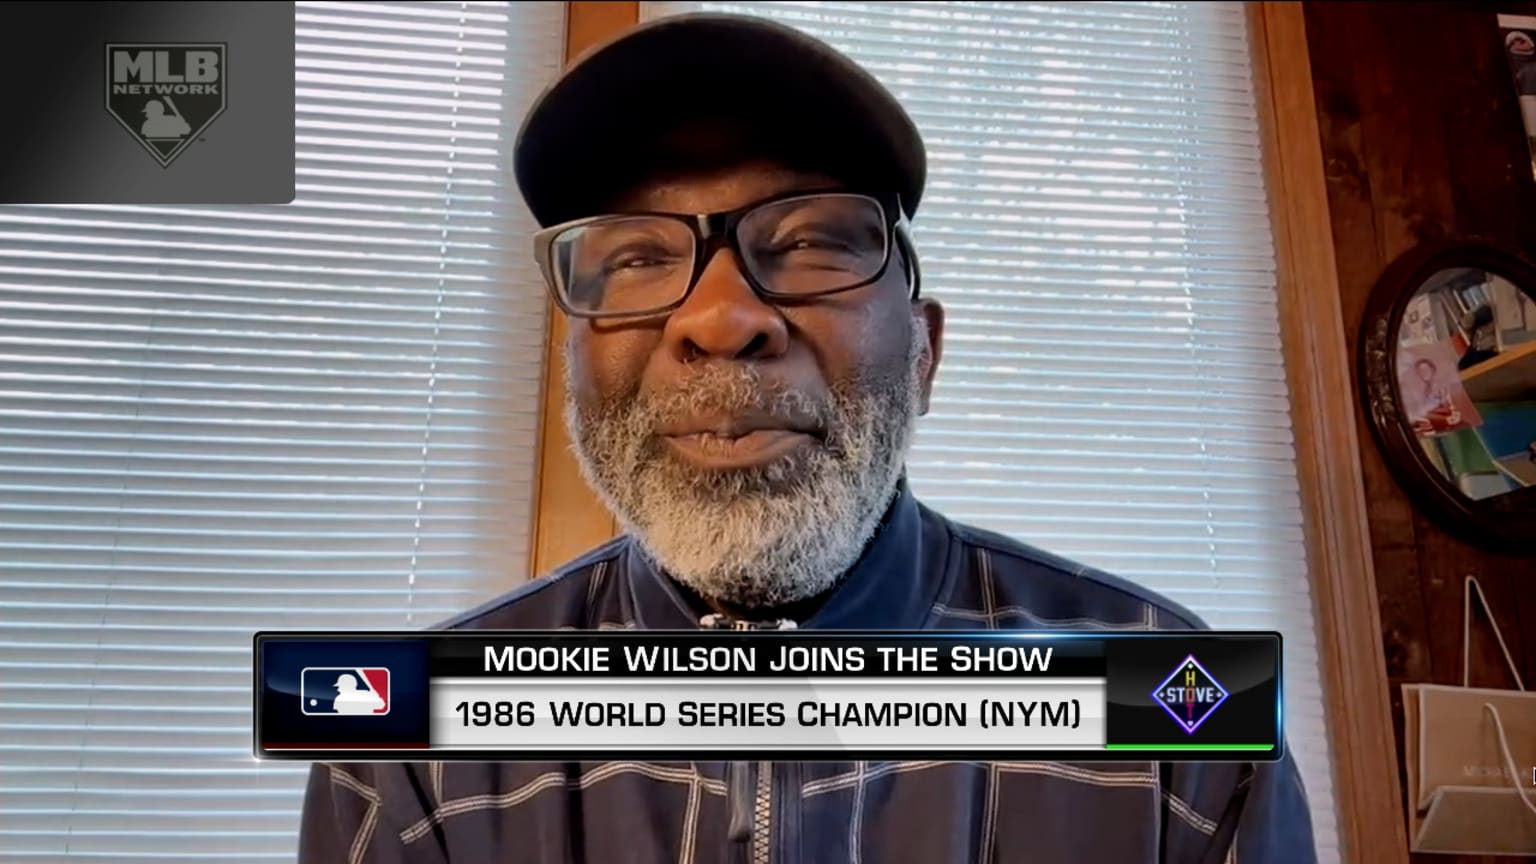 Image] Mookie Wilson had it figured out many years ago. Keep it